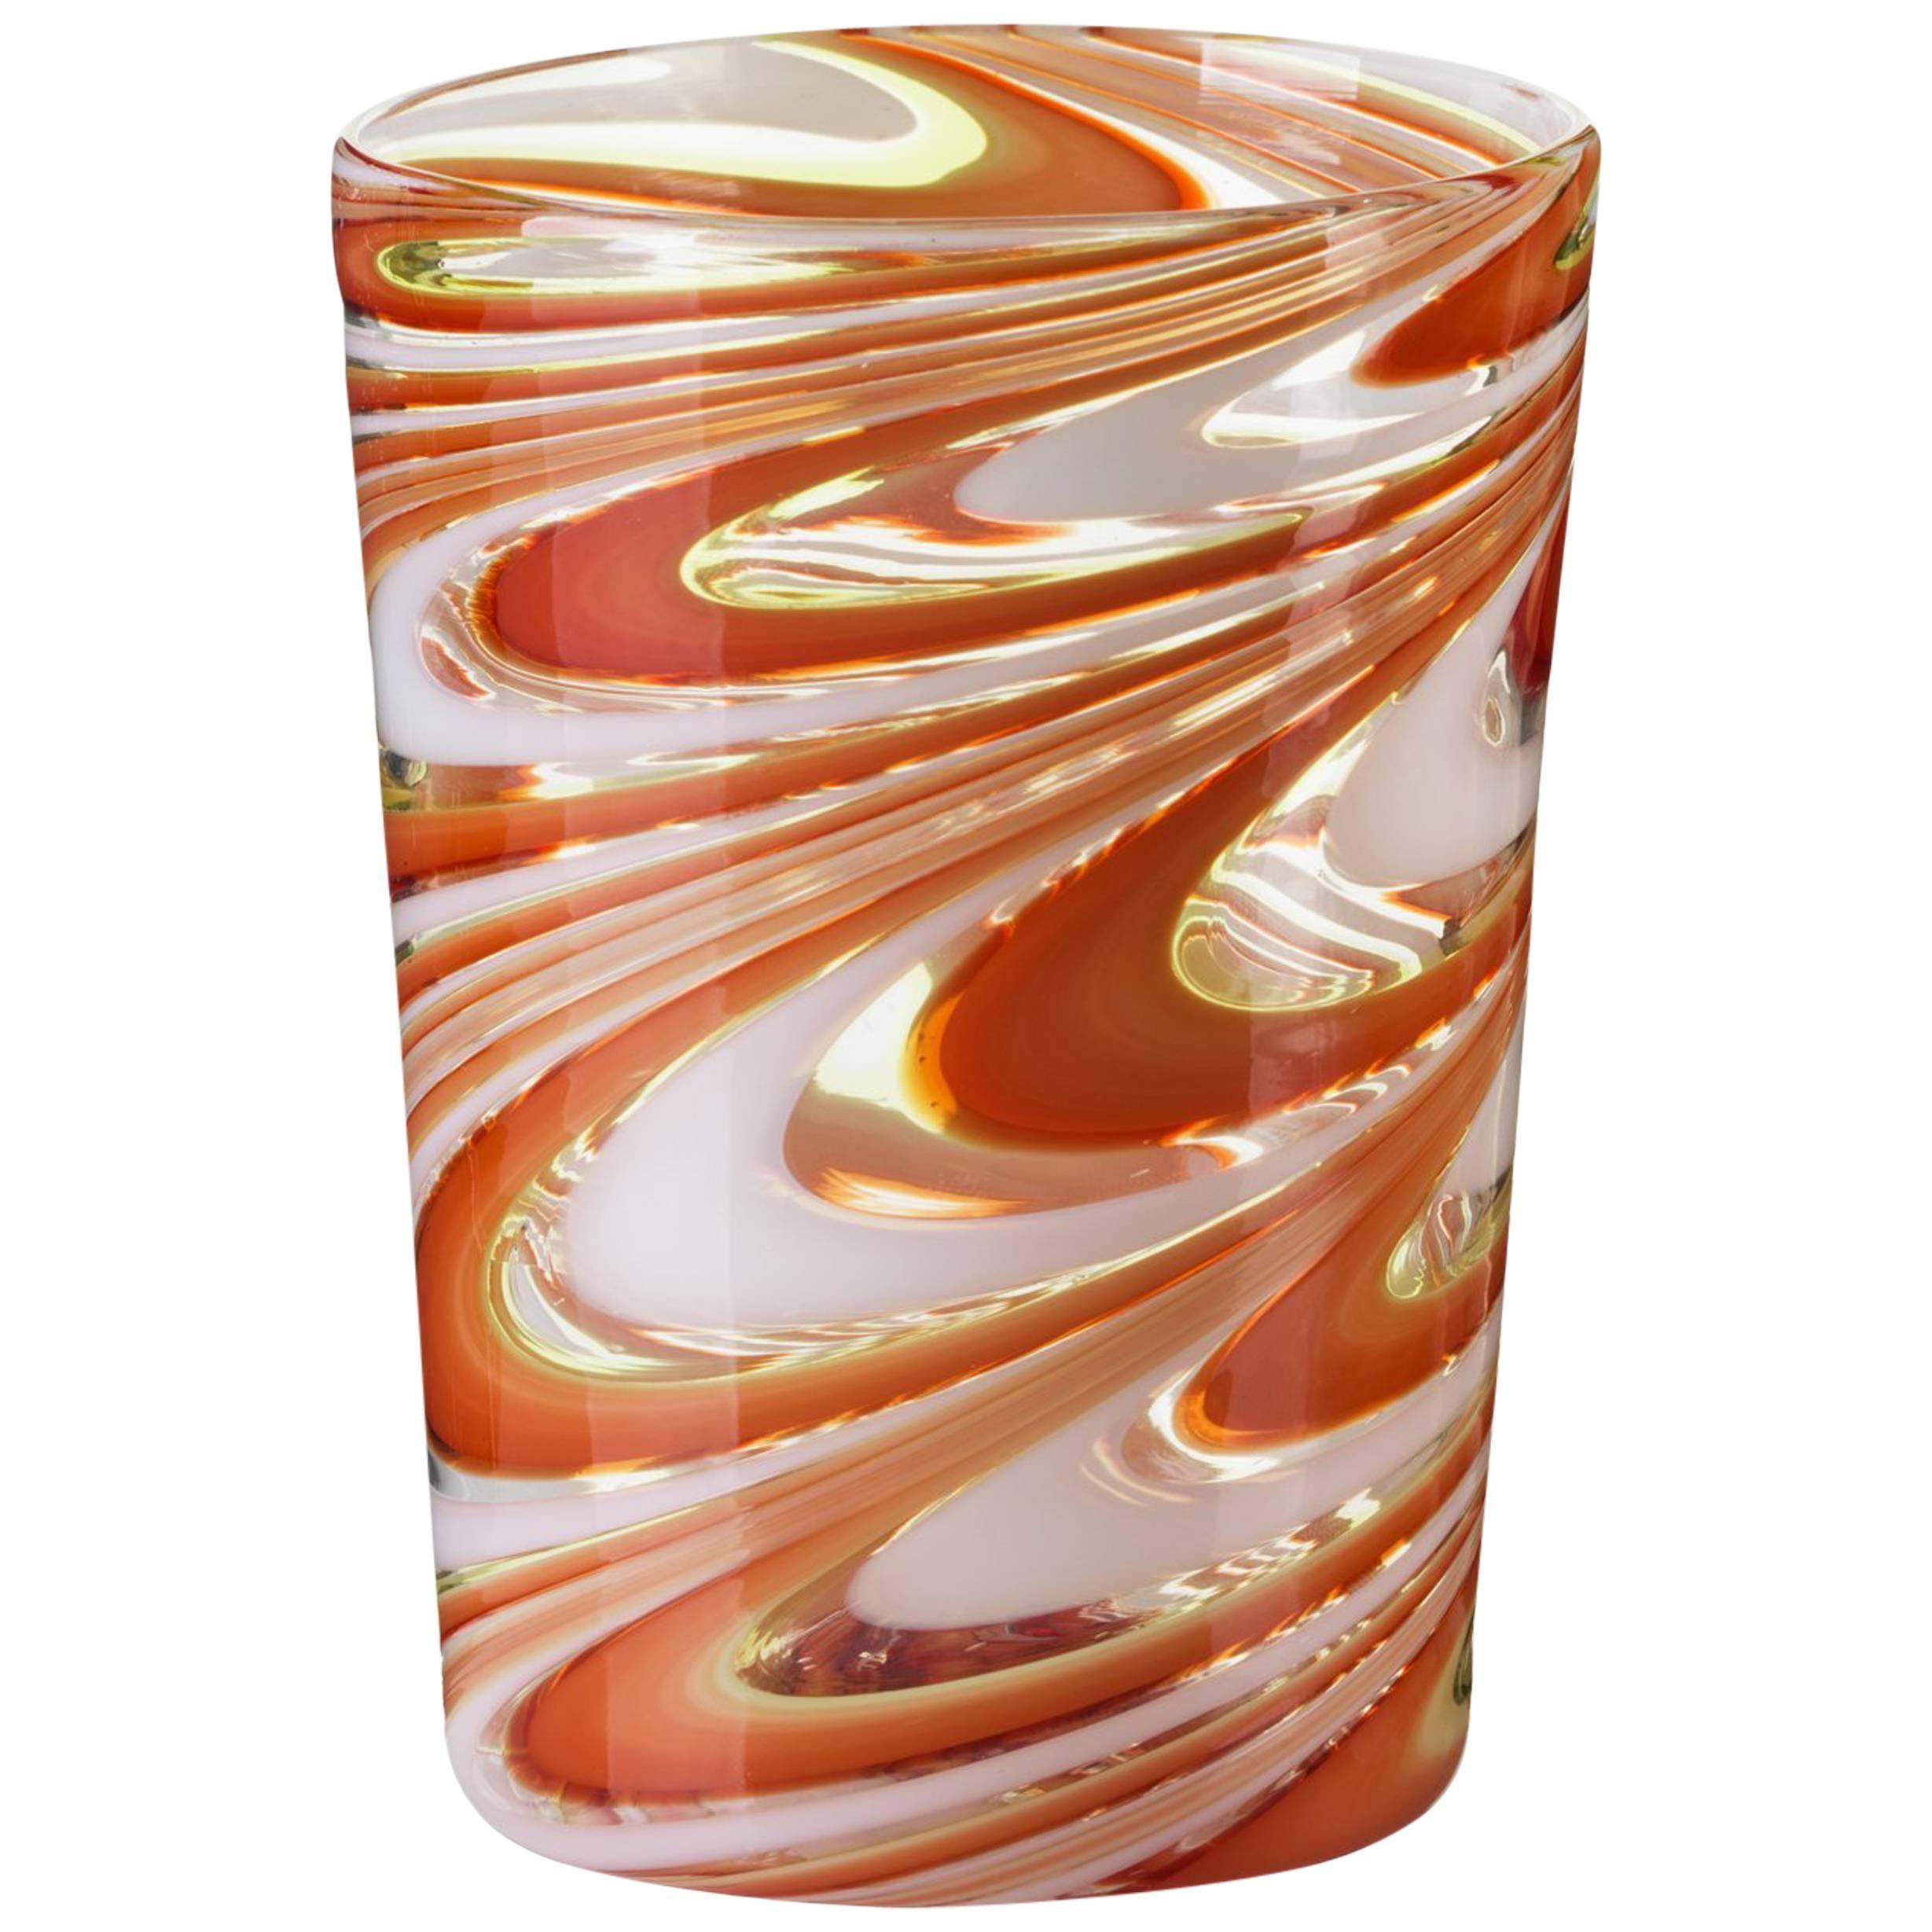 Fenice tumbler, set of two

This tumbler is handcrafted in Venice by Laguna B exclusively for Cabana. They are all hand blown in Murano, Venice. Each item corresponds to two glasses. You can order as many items as desired.